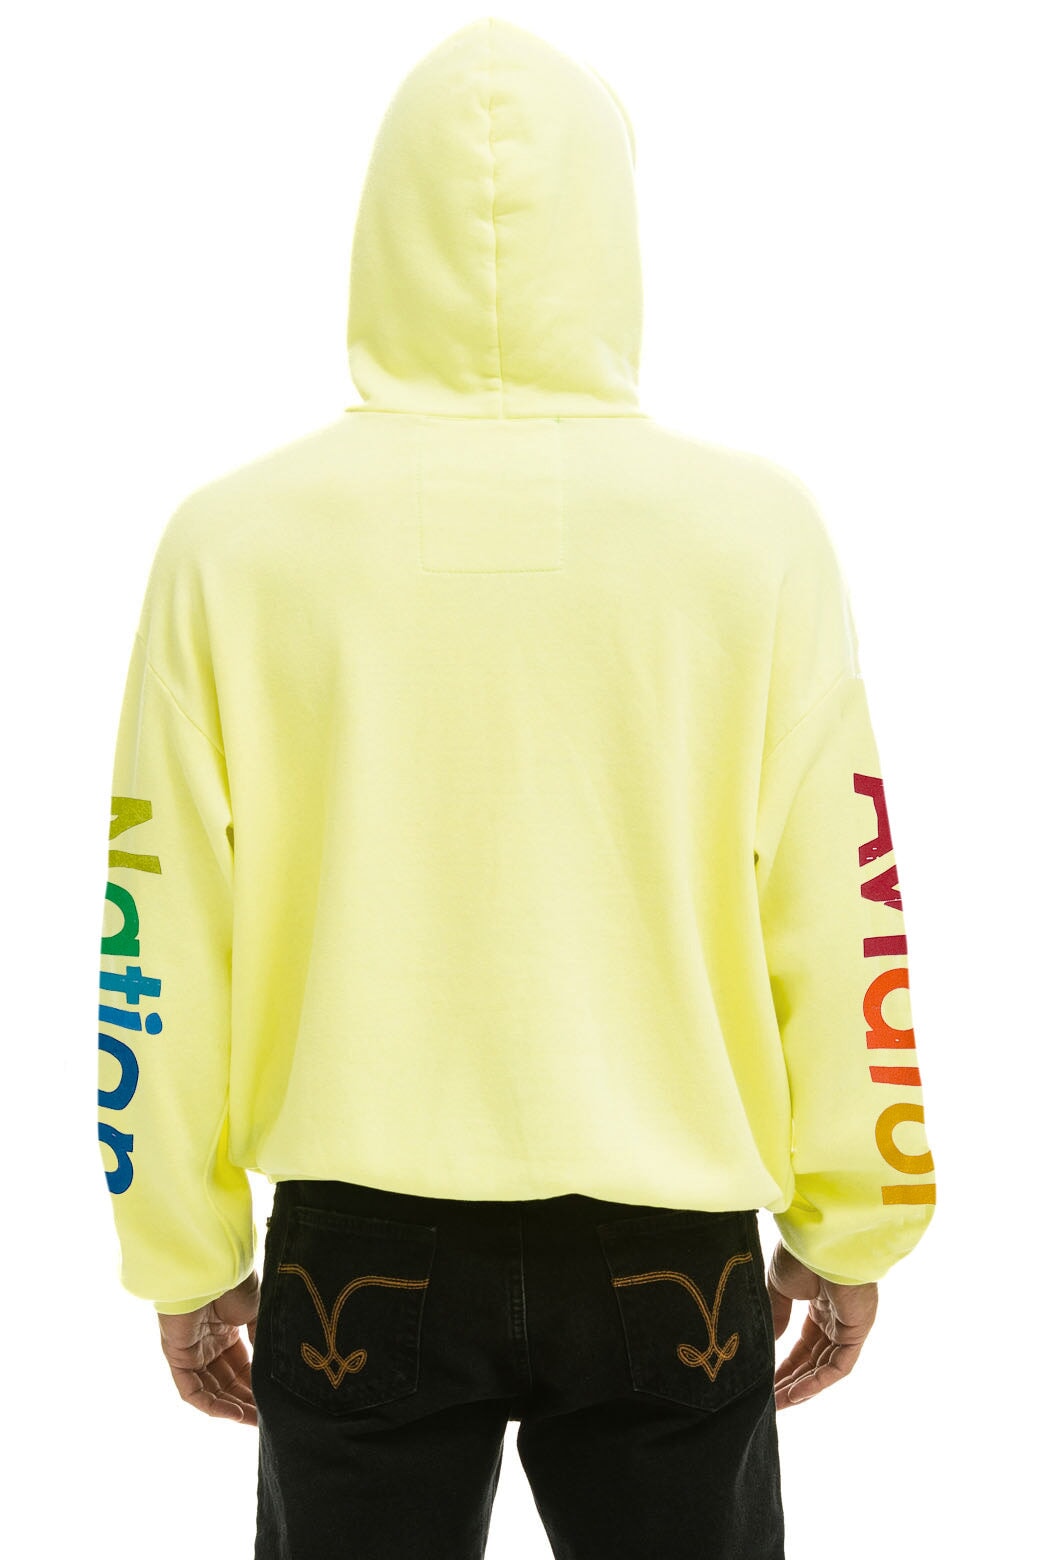 AVIATOR NATION ASPEN RELAXED PULLOVER HOODIE - NEON YELLOW Hoodie Aviator Nation 